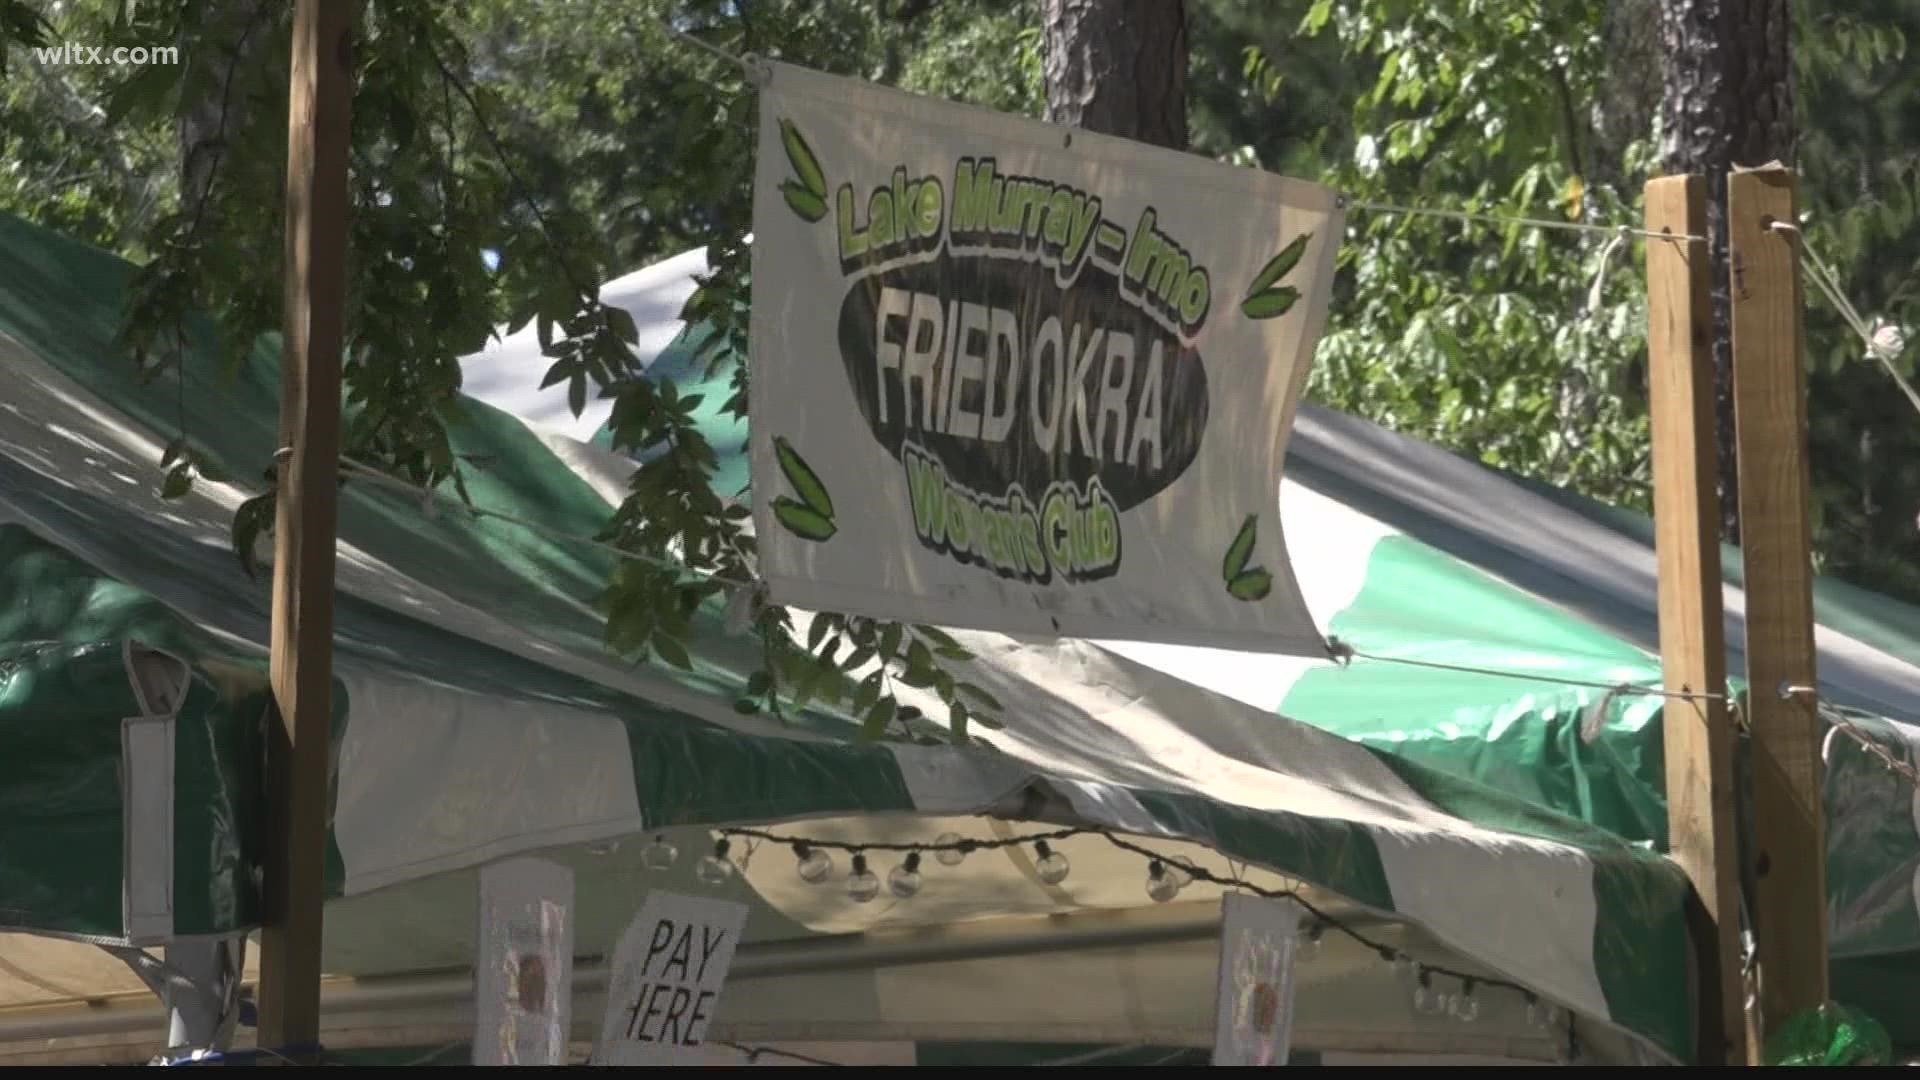 The annual Irmo Okra Strut is back for another edition with food and fun for the community.